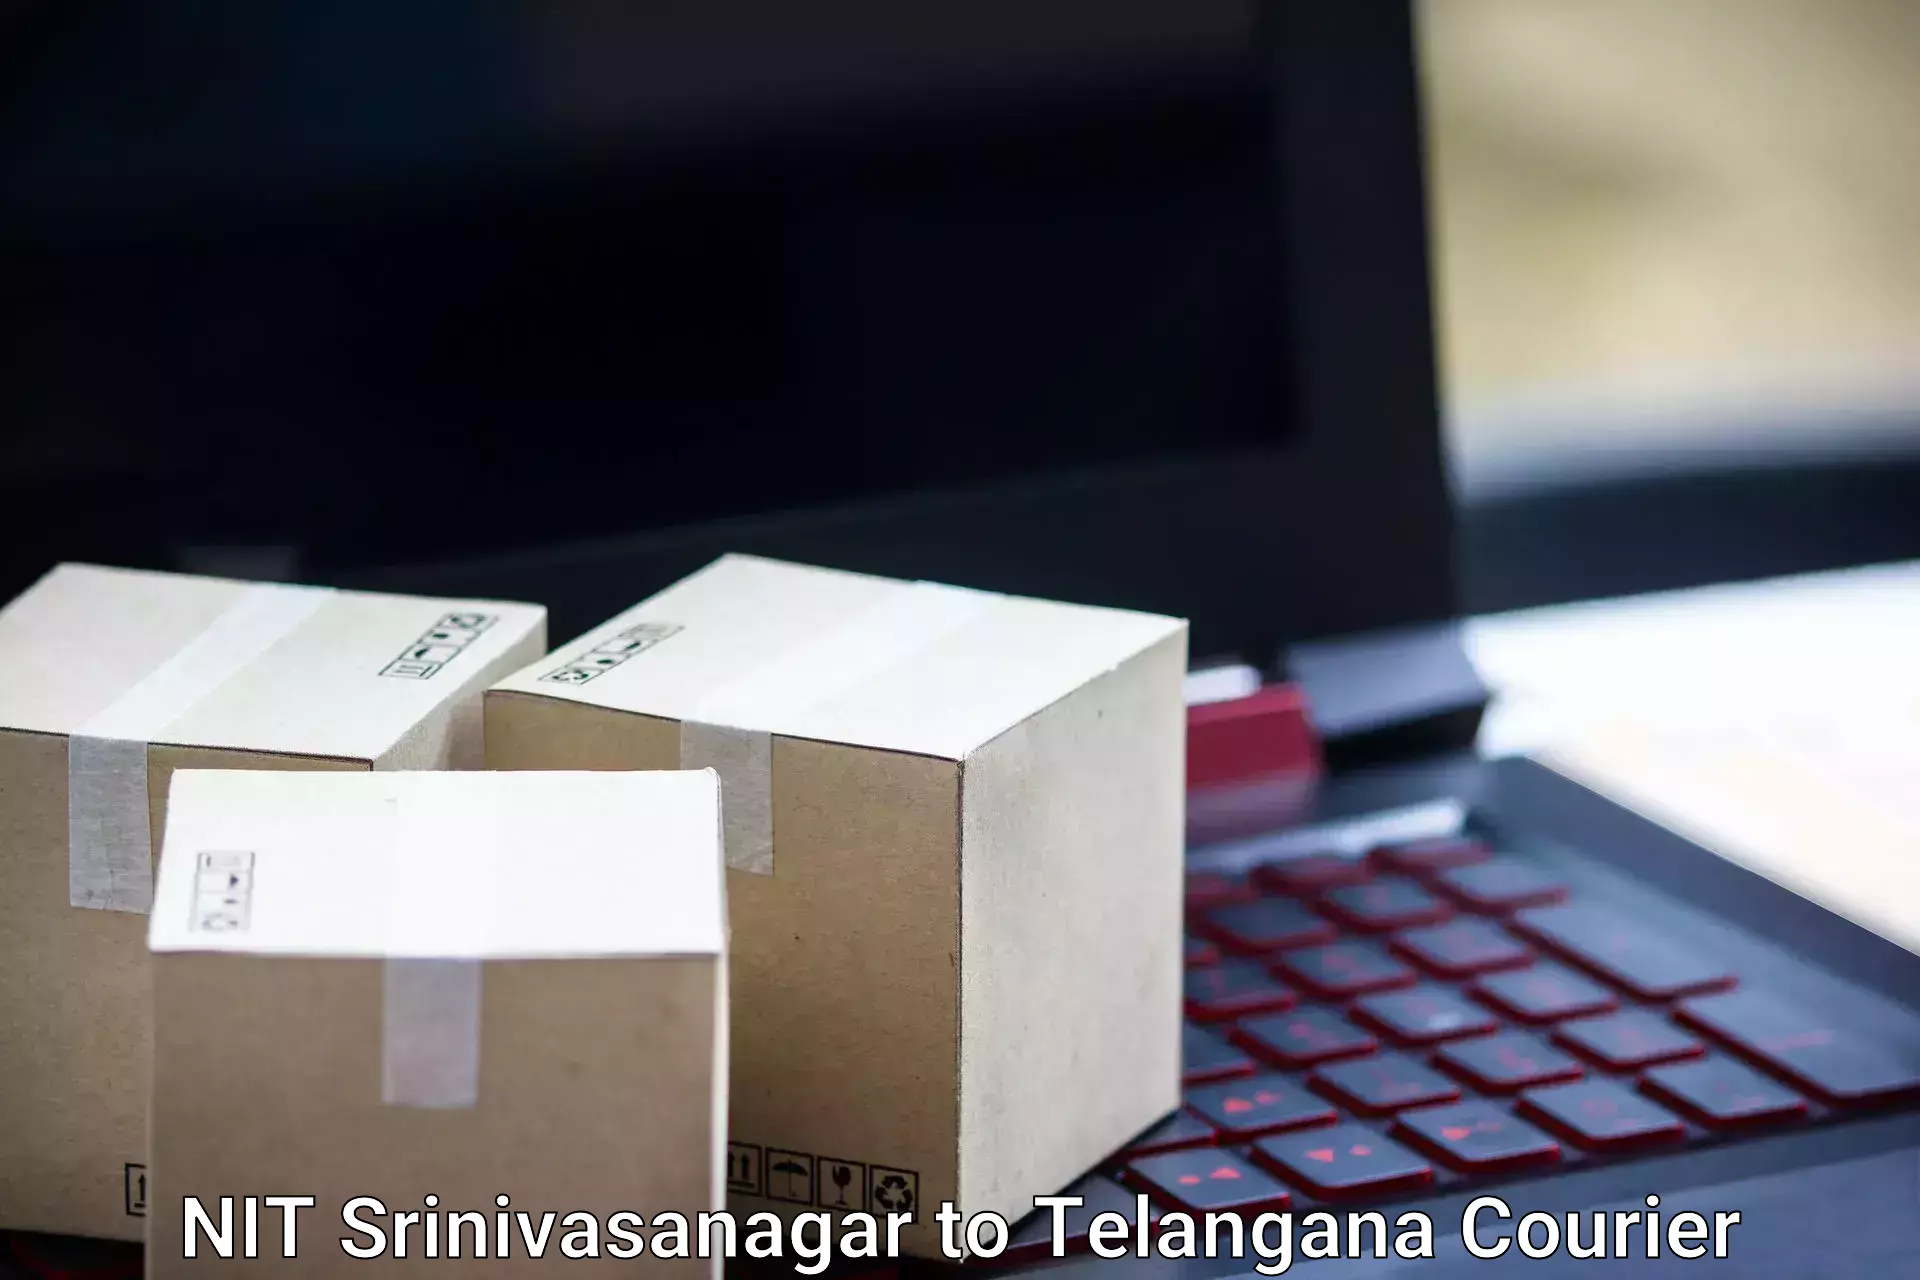 Personal effects shipping in NIT Srinivasanagar to Luxettipet